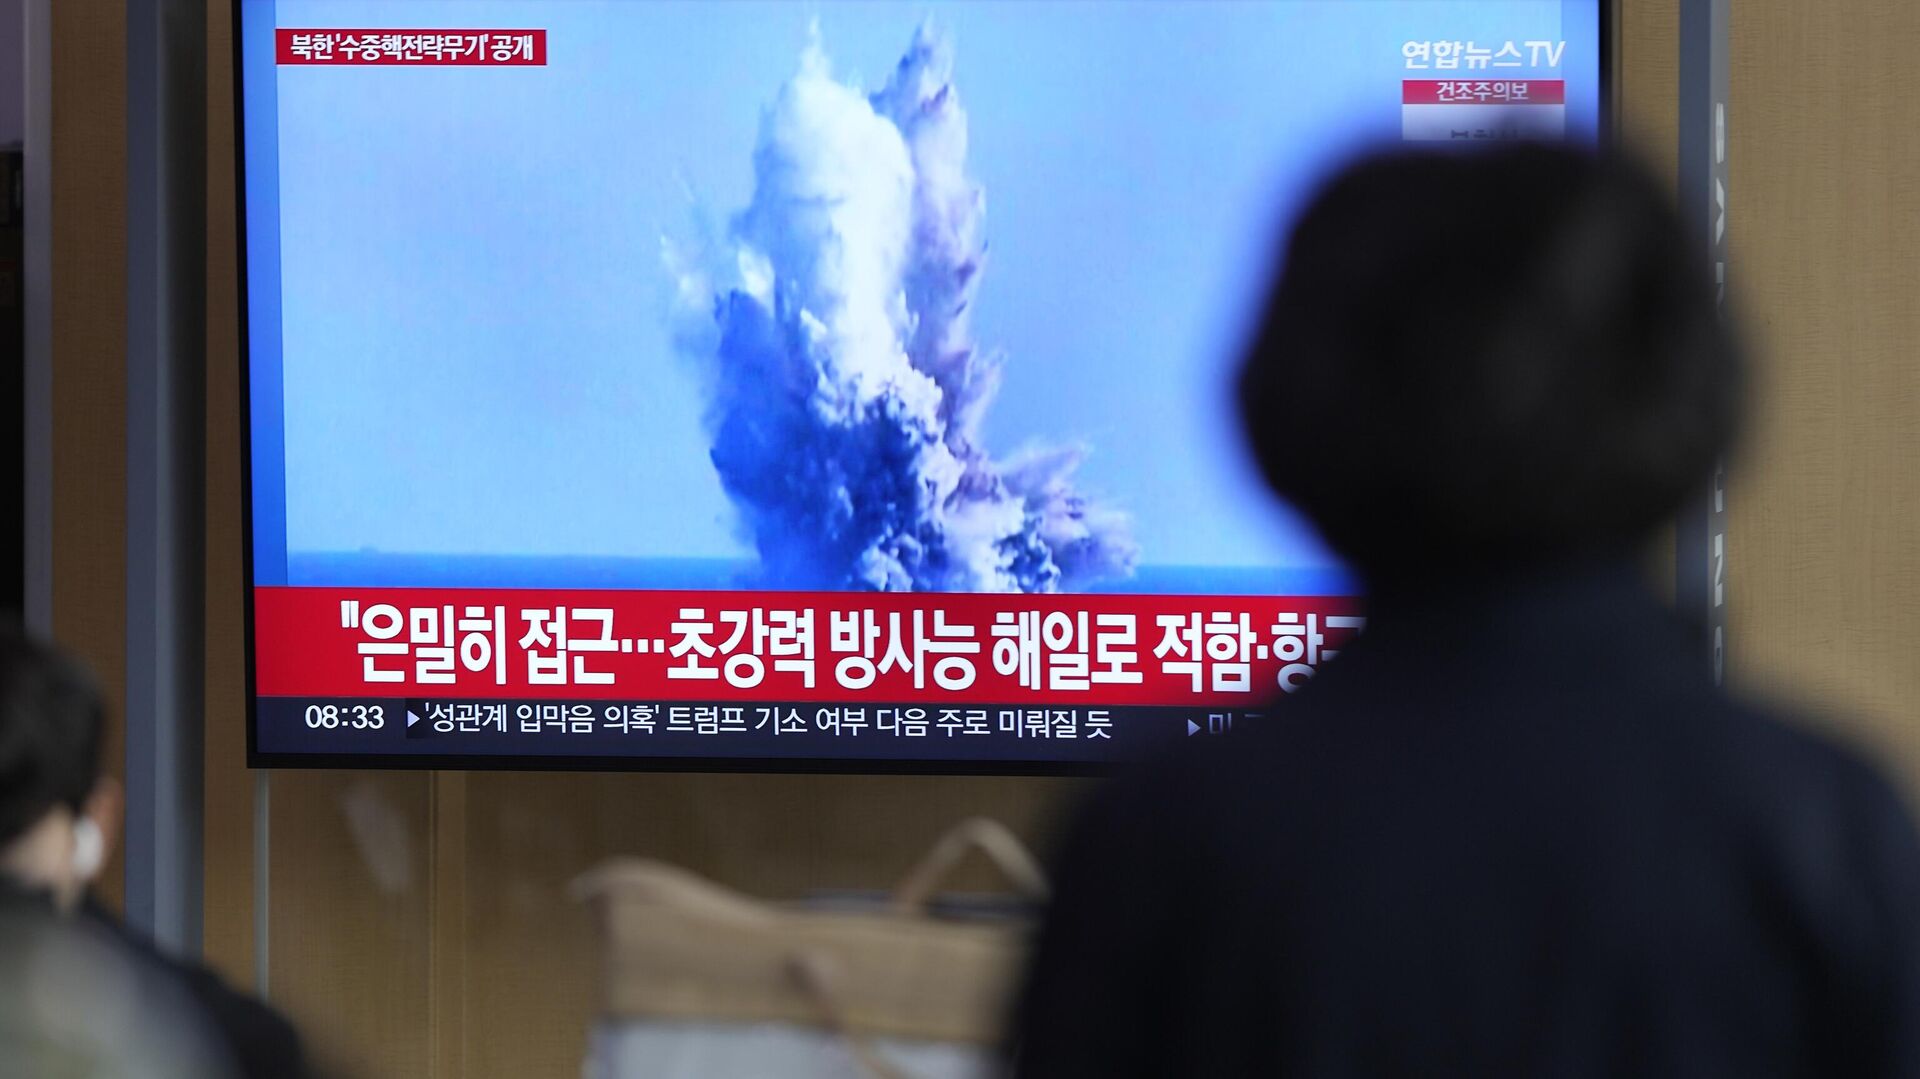 A TV screen shows a recent image released by Pyongyang’s official Korean Central News Agency during a news program at the Seoul Railway Station in Seoul, South Korea, Friday, March 24, 2023. North Korea said Friday its cruise missile launches this week were part of nuclear attack simulations that also involved a detonation by a purported underwater drone as leader Kim Jong Un vowed to make his rivals plunge into despair. - Sputnik International, 1920, 27.03.2023